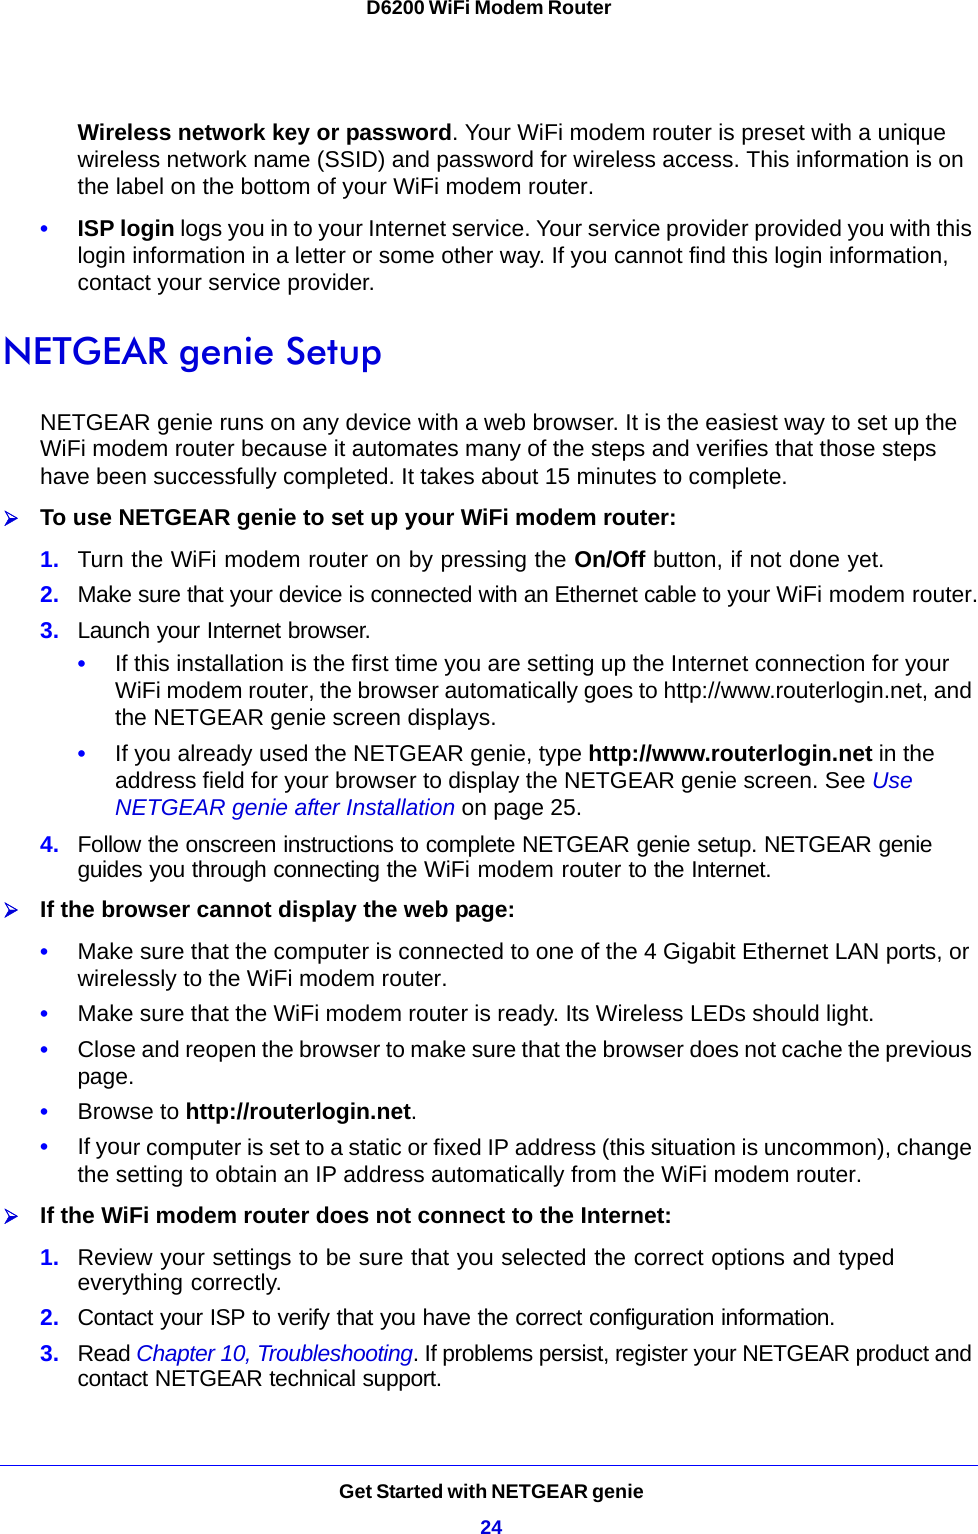 Get Started with NETGEAR genie24D6200 WiFi Modem Router Wireless network key or password. Your WiFi modem router is preset with a unique wireless network name (SSID) and password for wireless access. This information is on the label on the bottom of your WiFi modem router.•ISP login logs you in to your Internet service. Your service provider provided you with this login information in a letter or some other way. If you cannot find this login information, contact your service provider.NETGEAR genie SetupNETGEAR genie runs on any device with a web browser. It is the easiest way to set up the WiFi modem router because it automates many of the steps and verifies that those steps have been successfully completed. It takes about 15 minutes to complete. To use NETGEAR genie to set up your WiFi modem router:1. Turn the WiFi modem router on by pressing the On/Off button, if not done yet. 2. Make sure that your device is connected with an Ethernet cable to your WiFi modem router.3. Launch your Internet browser.•If this installation is the first time you are setting up the Internet connection for your WiFi modem router, the browser automatically goes to http://www.routerlogin.net, and the NETGEAR genie screen displays.•If you already used the NETGEAR genie, type http://www.routerlogin.net in the address field for your browser to display the NETGEAR genie screen. See Use NETGEAR genie after Installation on page 25.4. Follow the onscreen instructions to complete NETGEAR genie setup. NETGEAR genie guides you through connecting the WiFi modem router to the Internet. If the browser cannot display the web page: •Make sure that the computer is connected to one of the 4 Gigabit Ethernet LAN ports, or wirelessly to the WiFi modem router.•Make sure that the WiFi modem router is ready. Its Wireless LEDs should light.•Close and reopen the browser to make sure that the browser does not cache the previous page.•Browse to http://routerlogin.net.•If your computer is set to a static or fixed IP address (this situation is uncommon), change the setting to obtain an IP address automatically from the WiFi modem router.If the WiFi modem router does not connect to the Internet:1. Review your settings to be sure that you selected the correct options and typed everything correctly. 2. Contact your ISP to verify that you have the correct configuration information.3. Read Chapter 10, Troubleshooting. If problems persist, register your NETGEAR product and contact NETGEAR technical support.